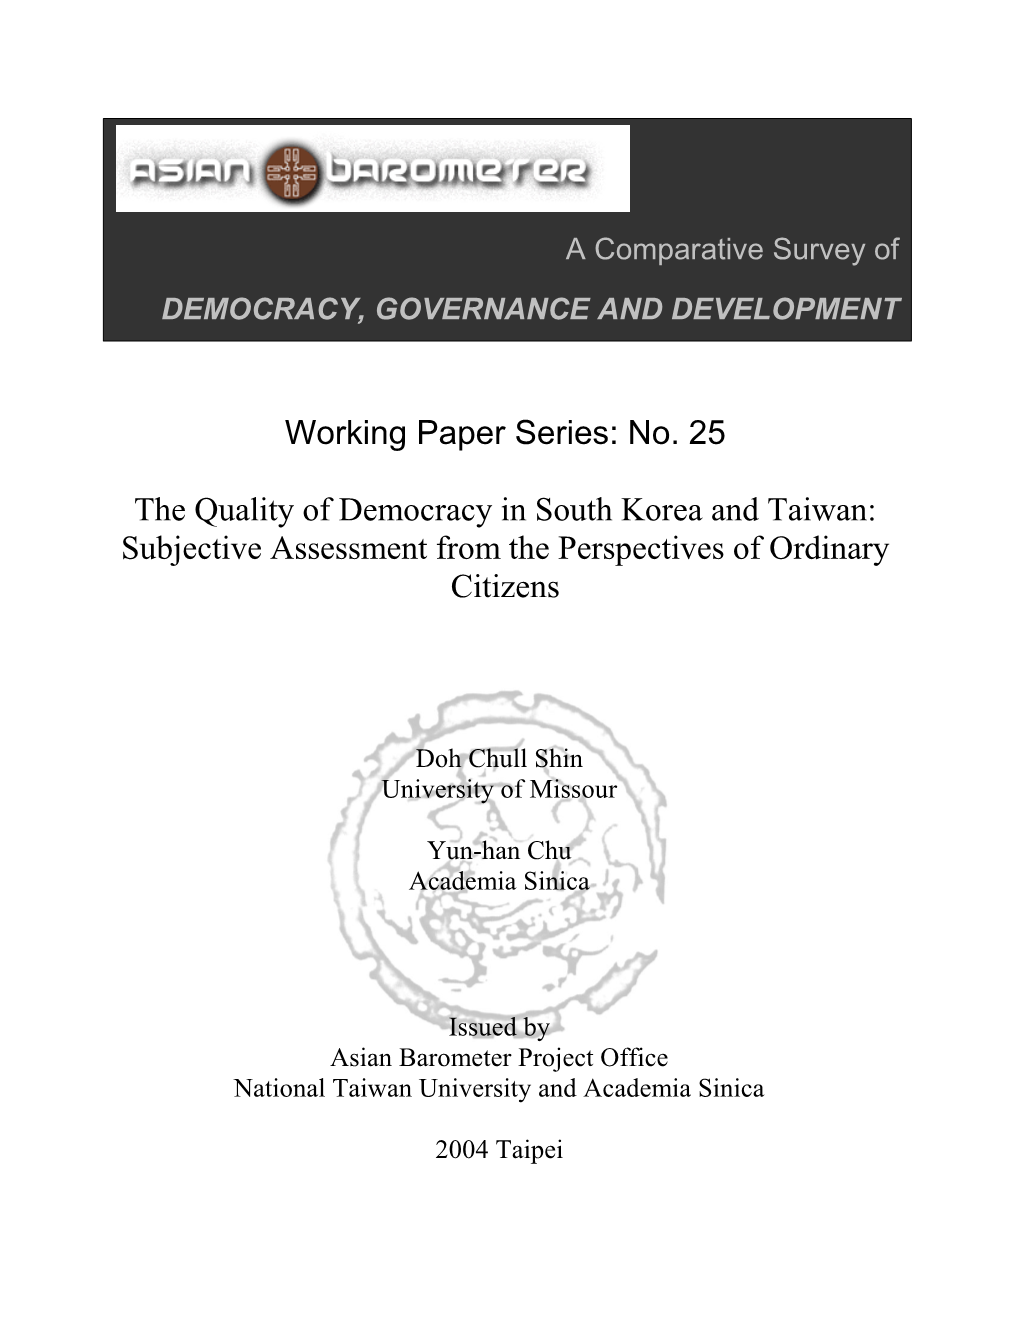 The Quality of Democracy in South Korea and Taiwan: Subjective Assessment from the Perspectives of Ordinary Citizens